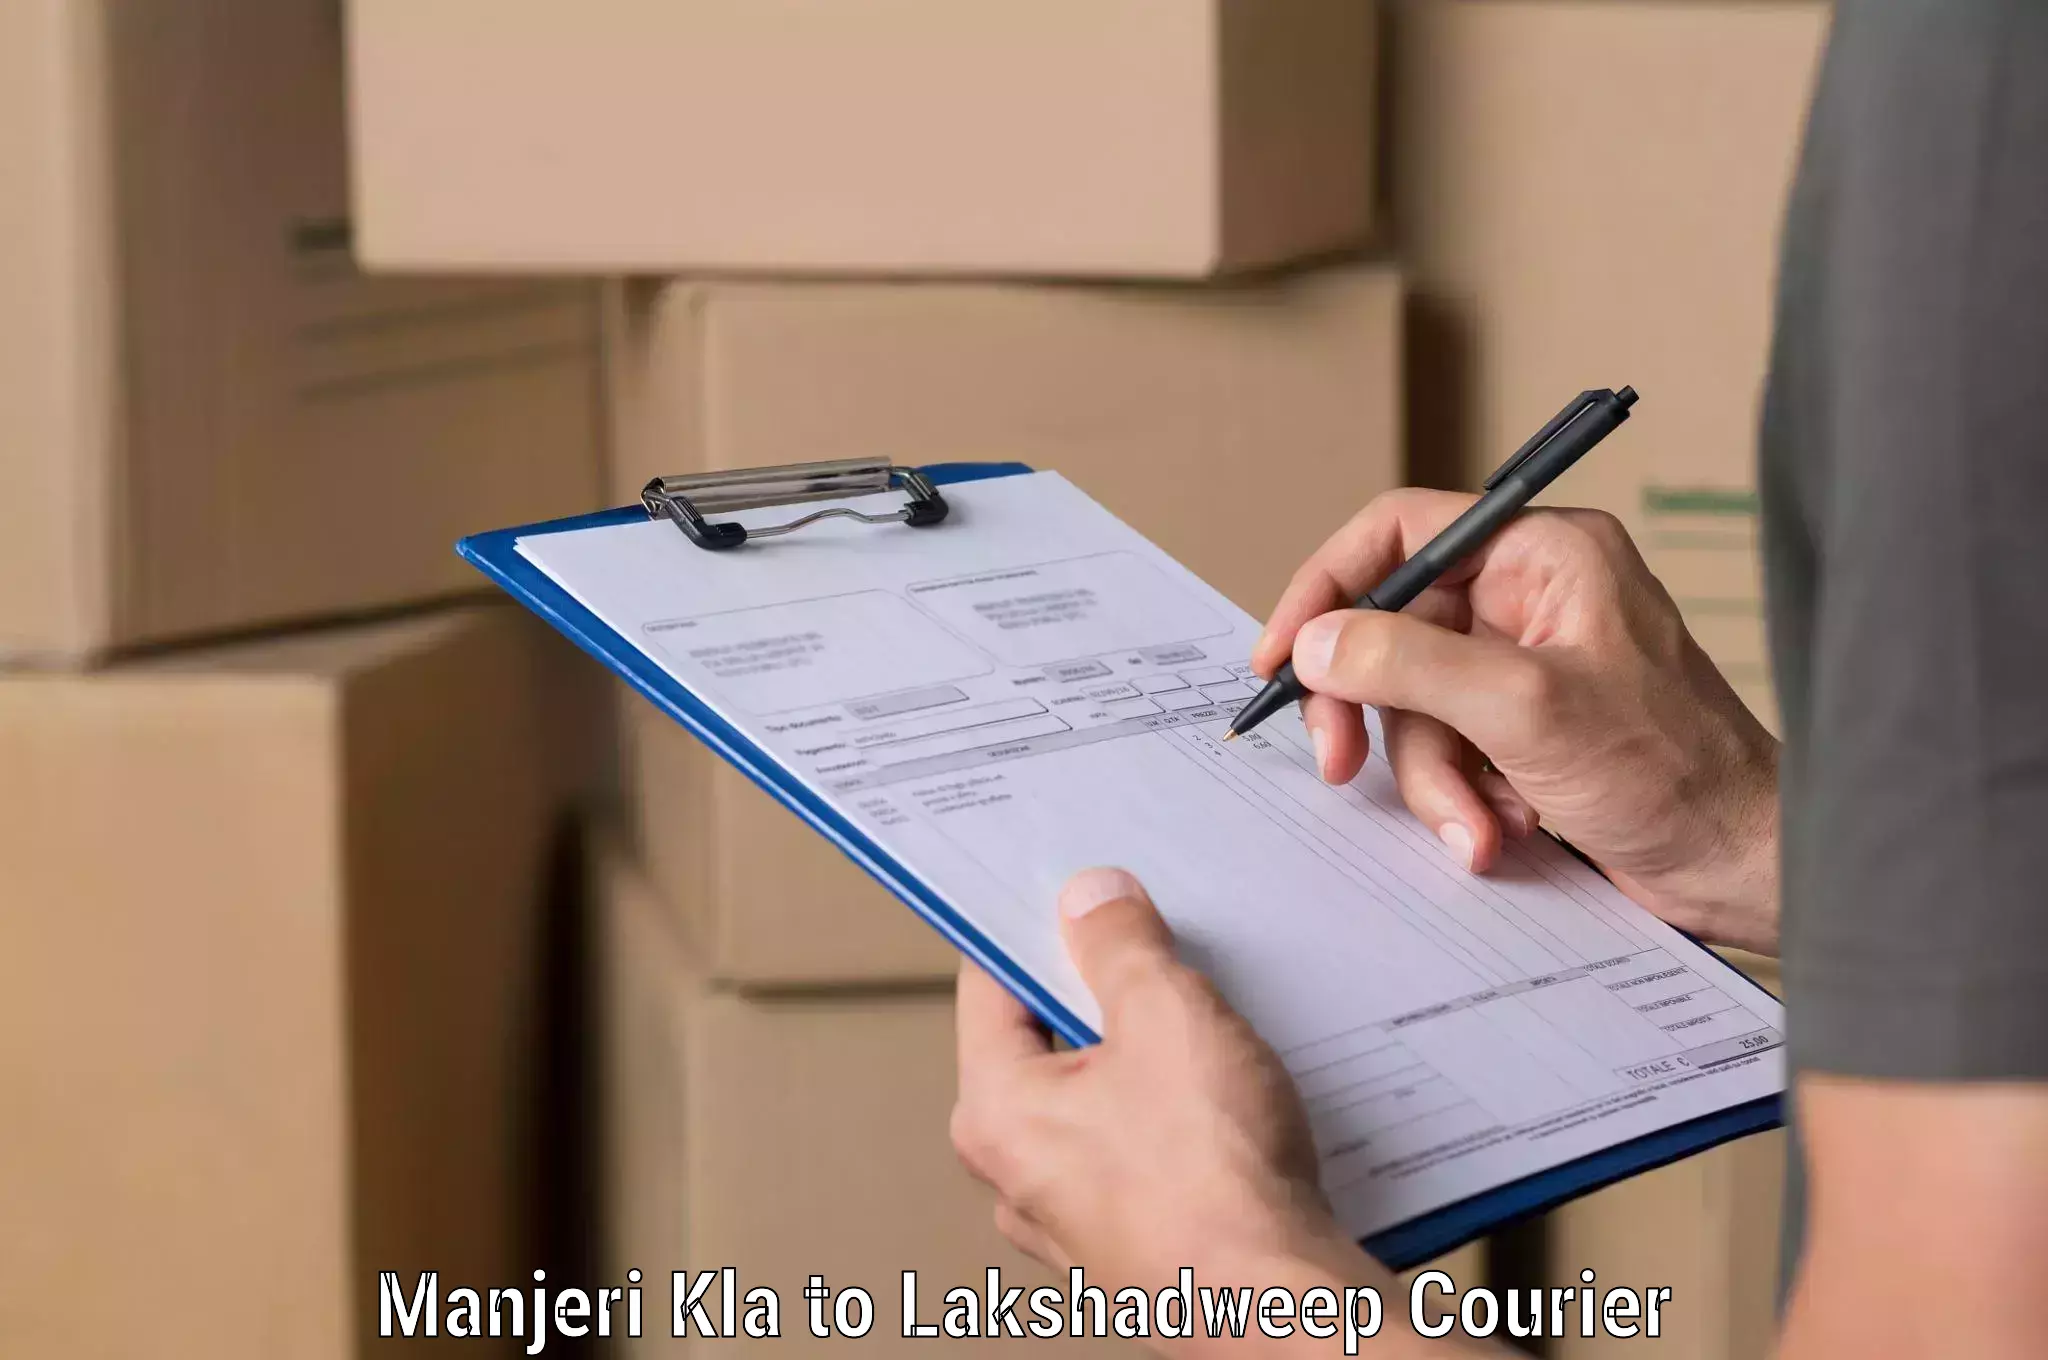 Specialized courier services Manjeri Kla to Lakshadweep